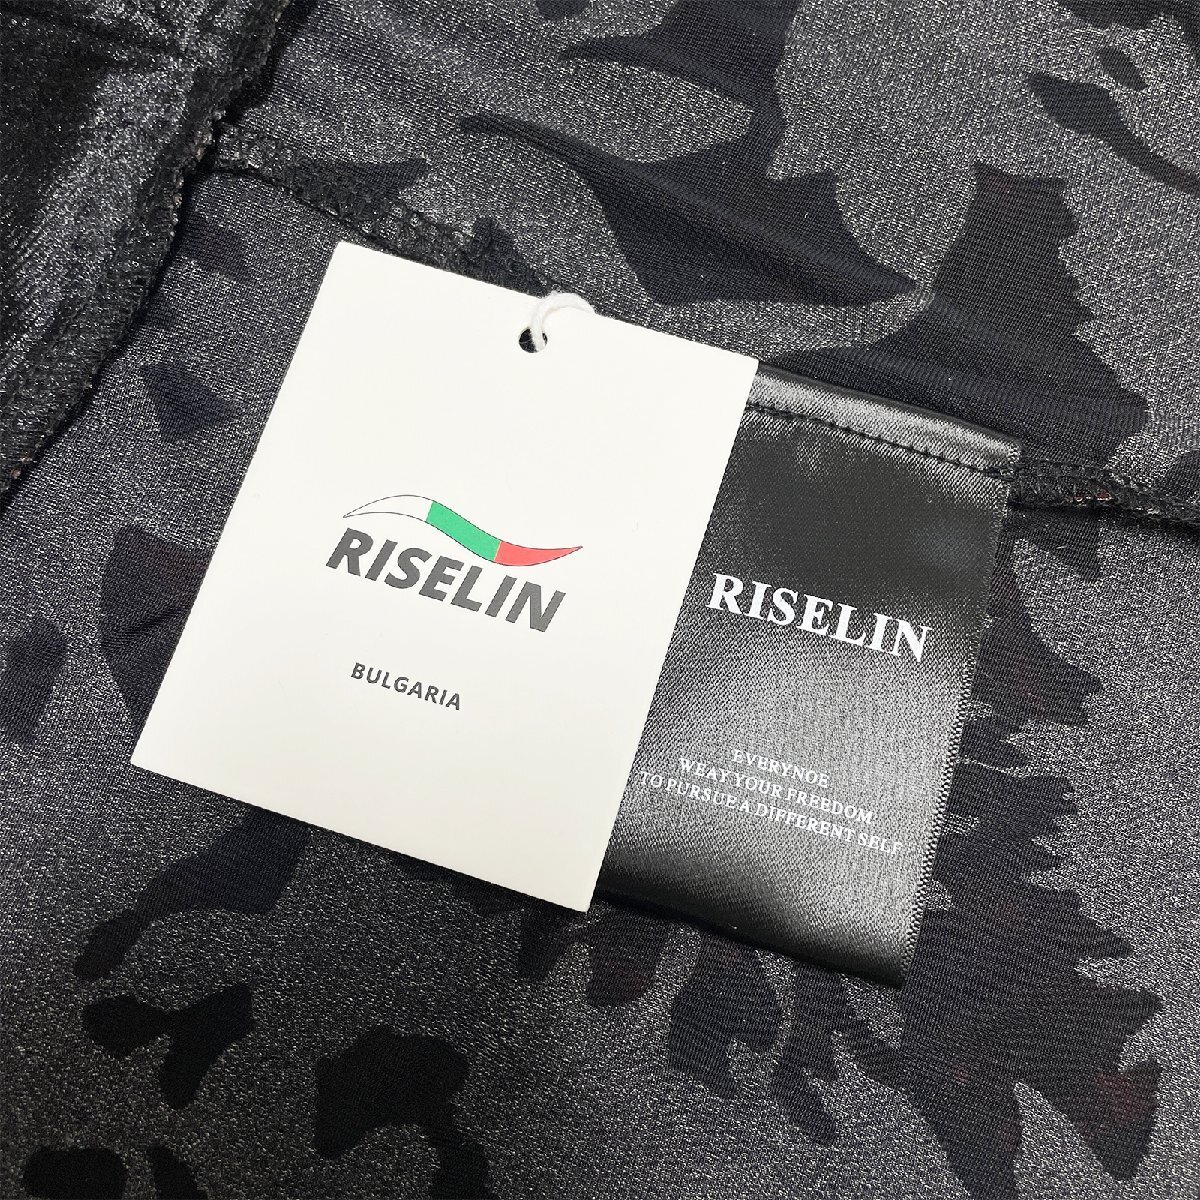  piece . Europe made * regular price 2 ten thousand * BVLGARY a departure *RISELIN short sleeves T-shirt thin ventilation gloss total pattern .. feeling tops retro casual lady's M